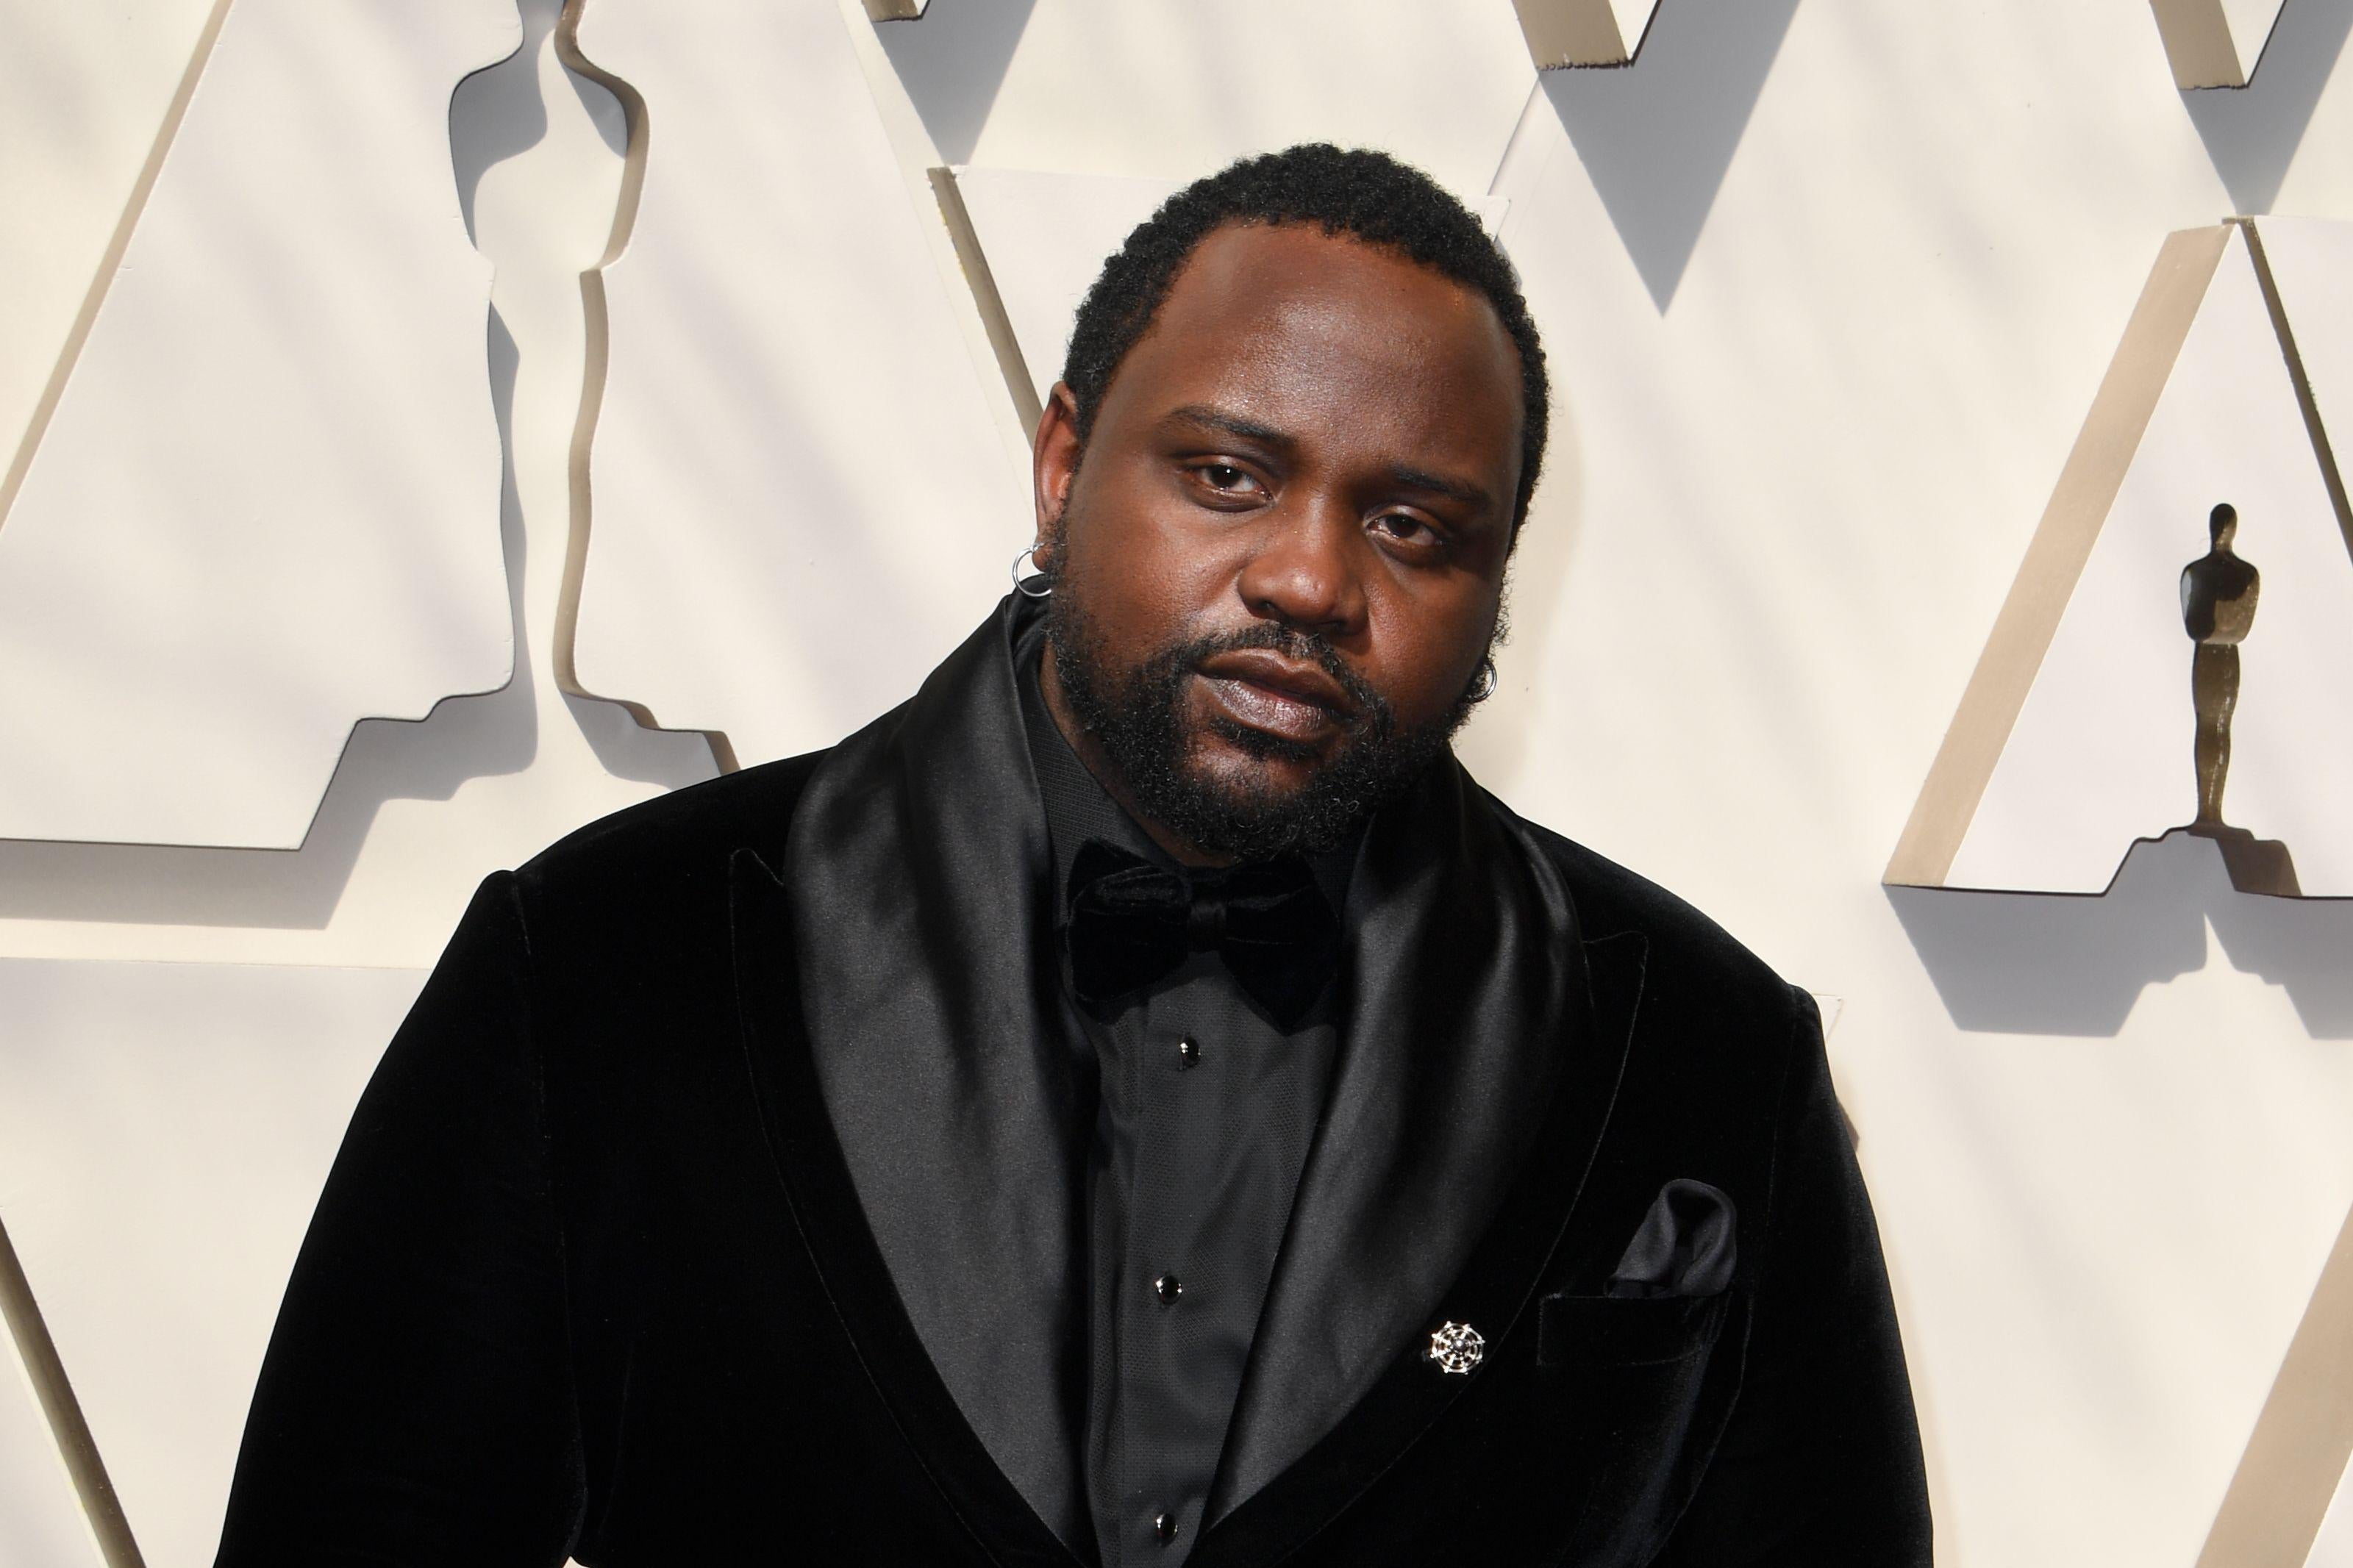 Brian Tyree Henry on the red carpet